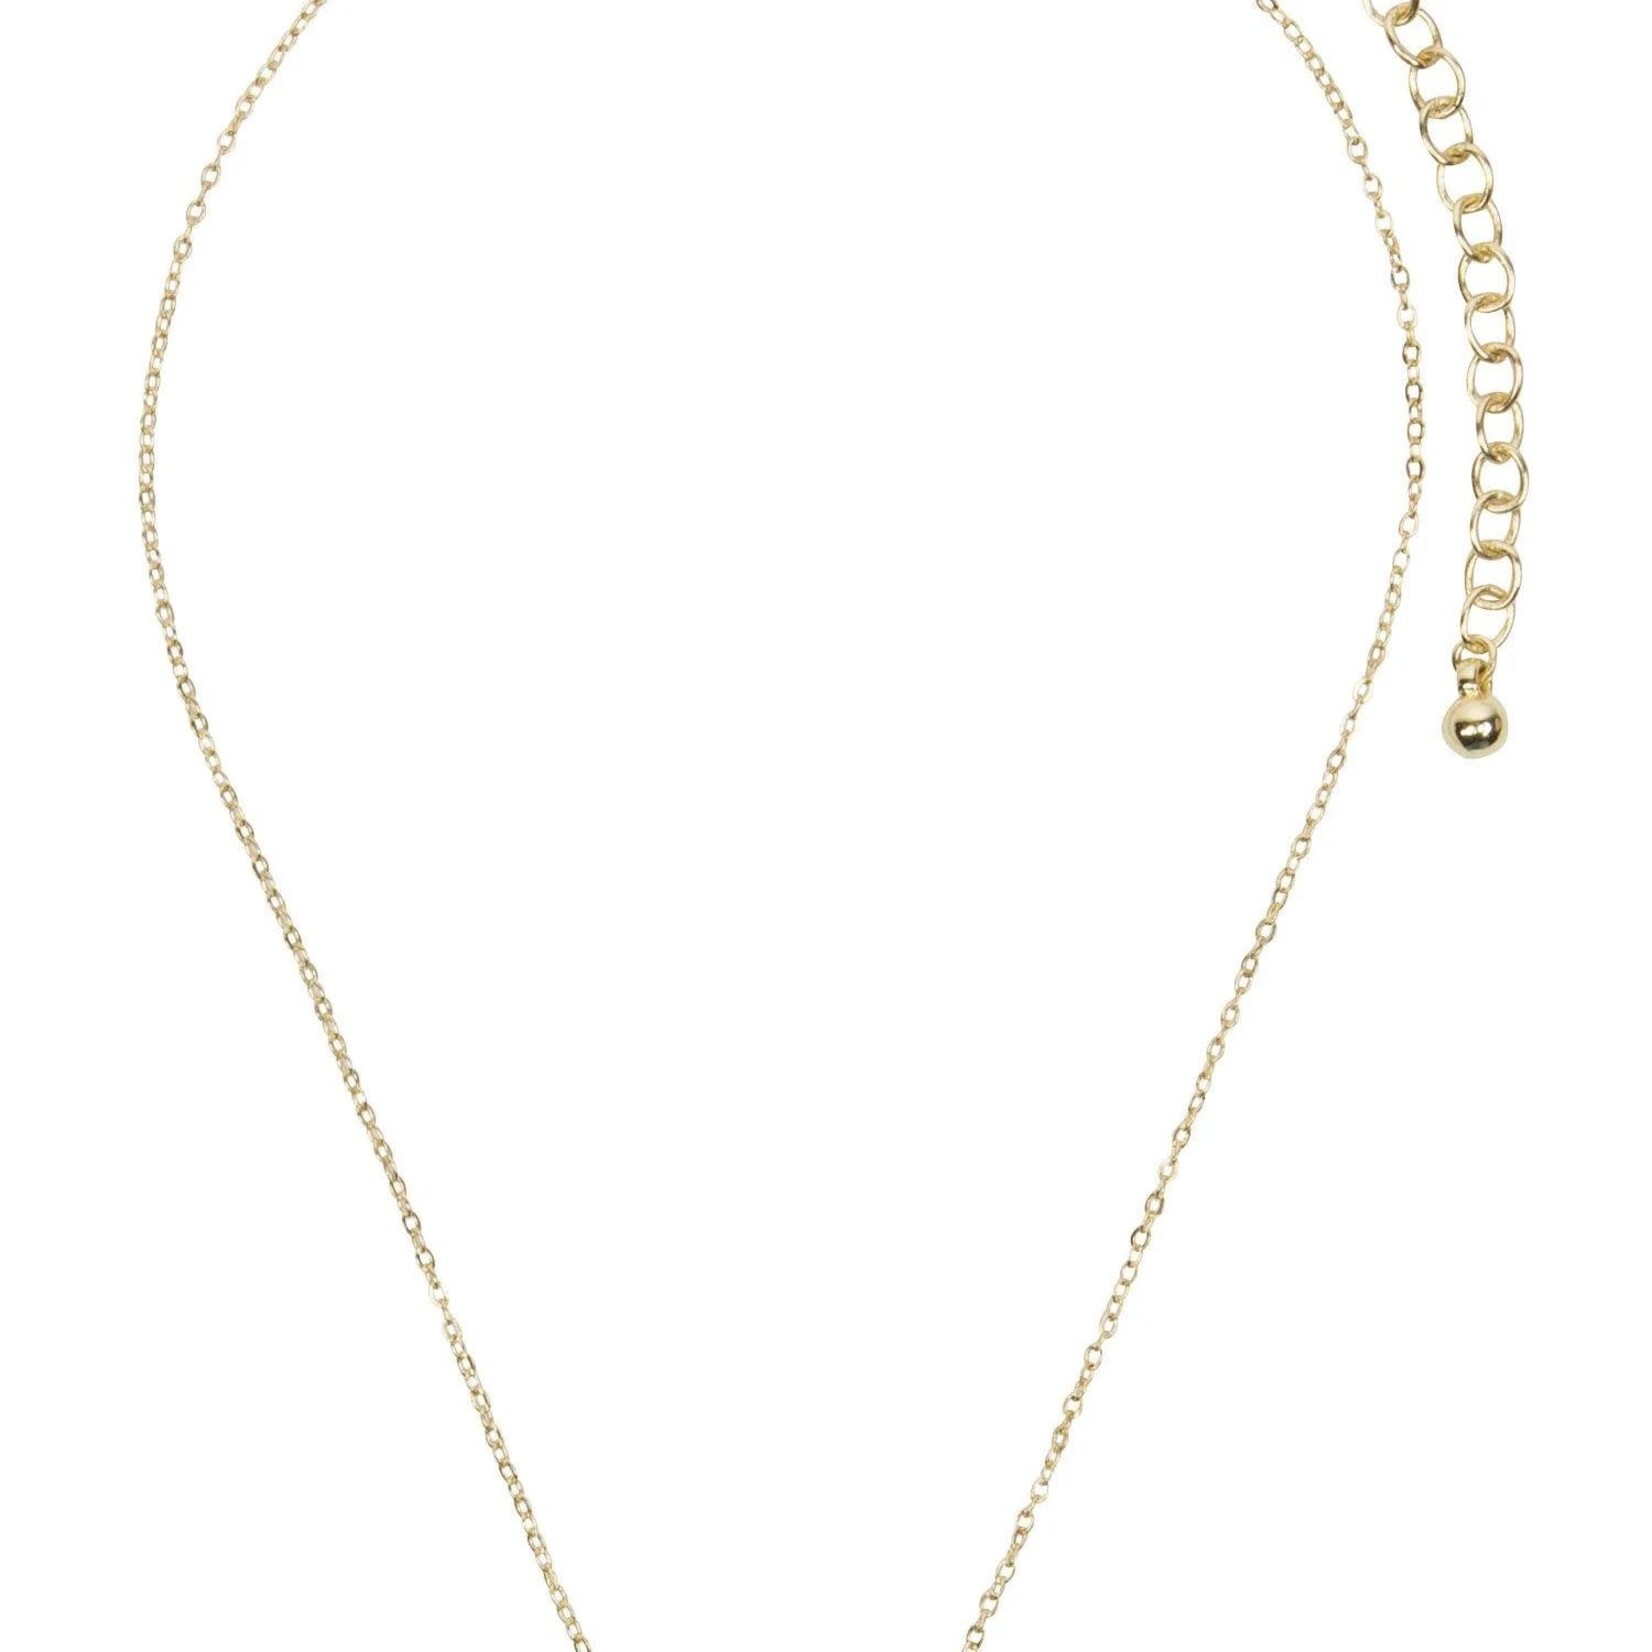 India Necklace 3 Hearts/Chain 15L Gld/Cppr